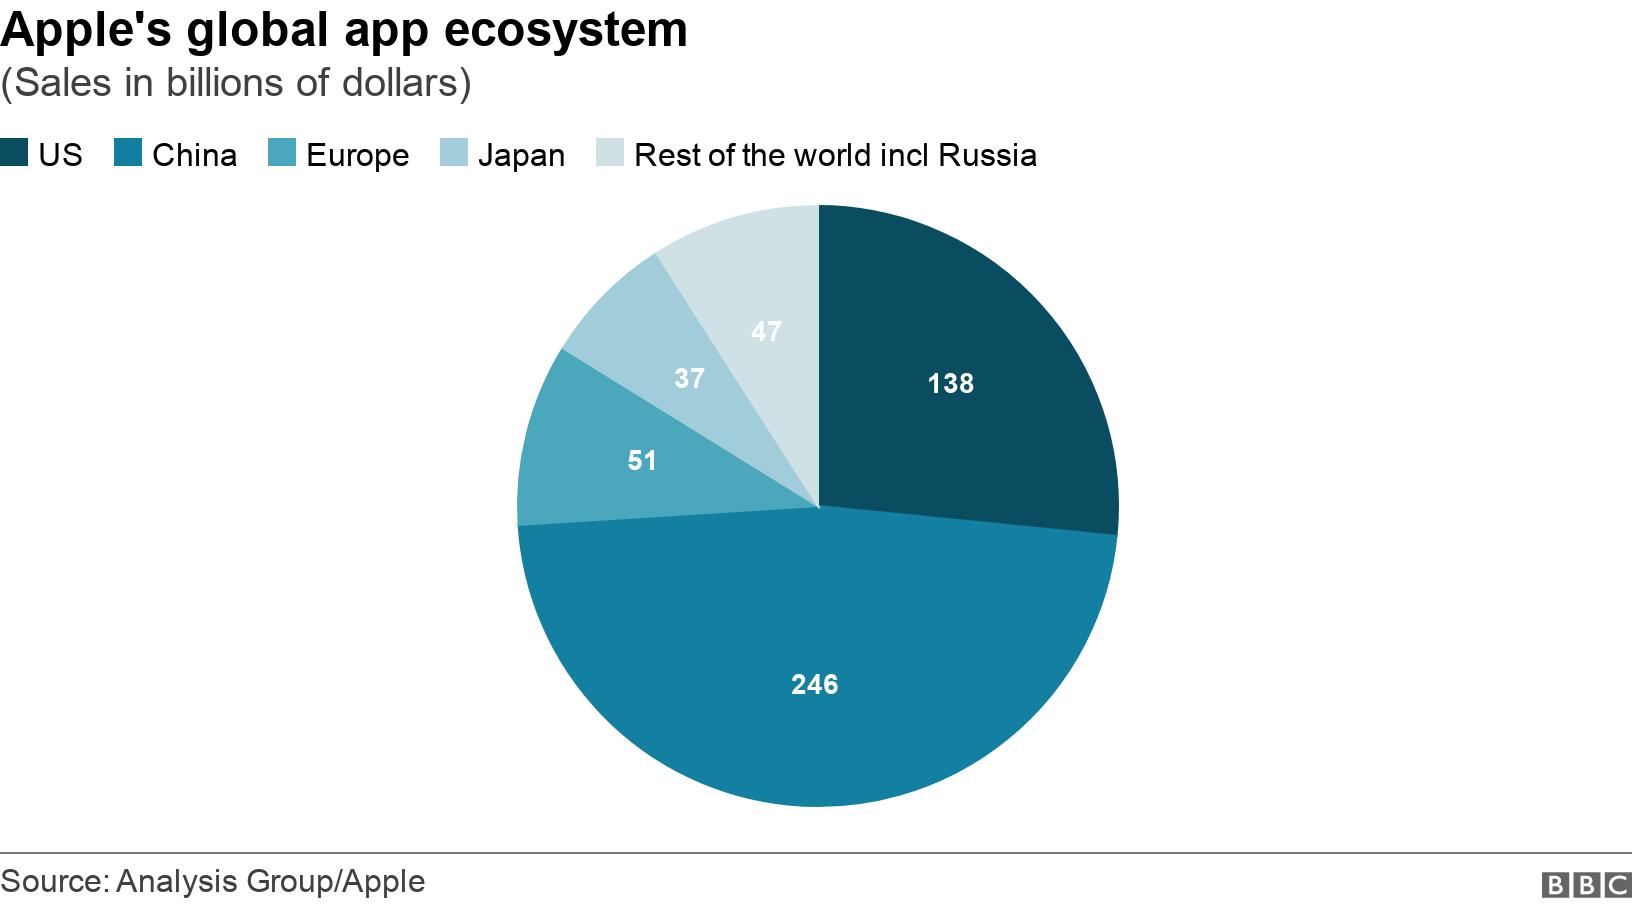 Apple's global app ecosystem. (Sales in billions of dollars). China accounts for $246bn of related billings and sales, followed by US with $138bn .